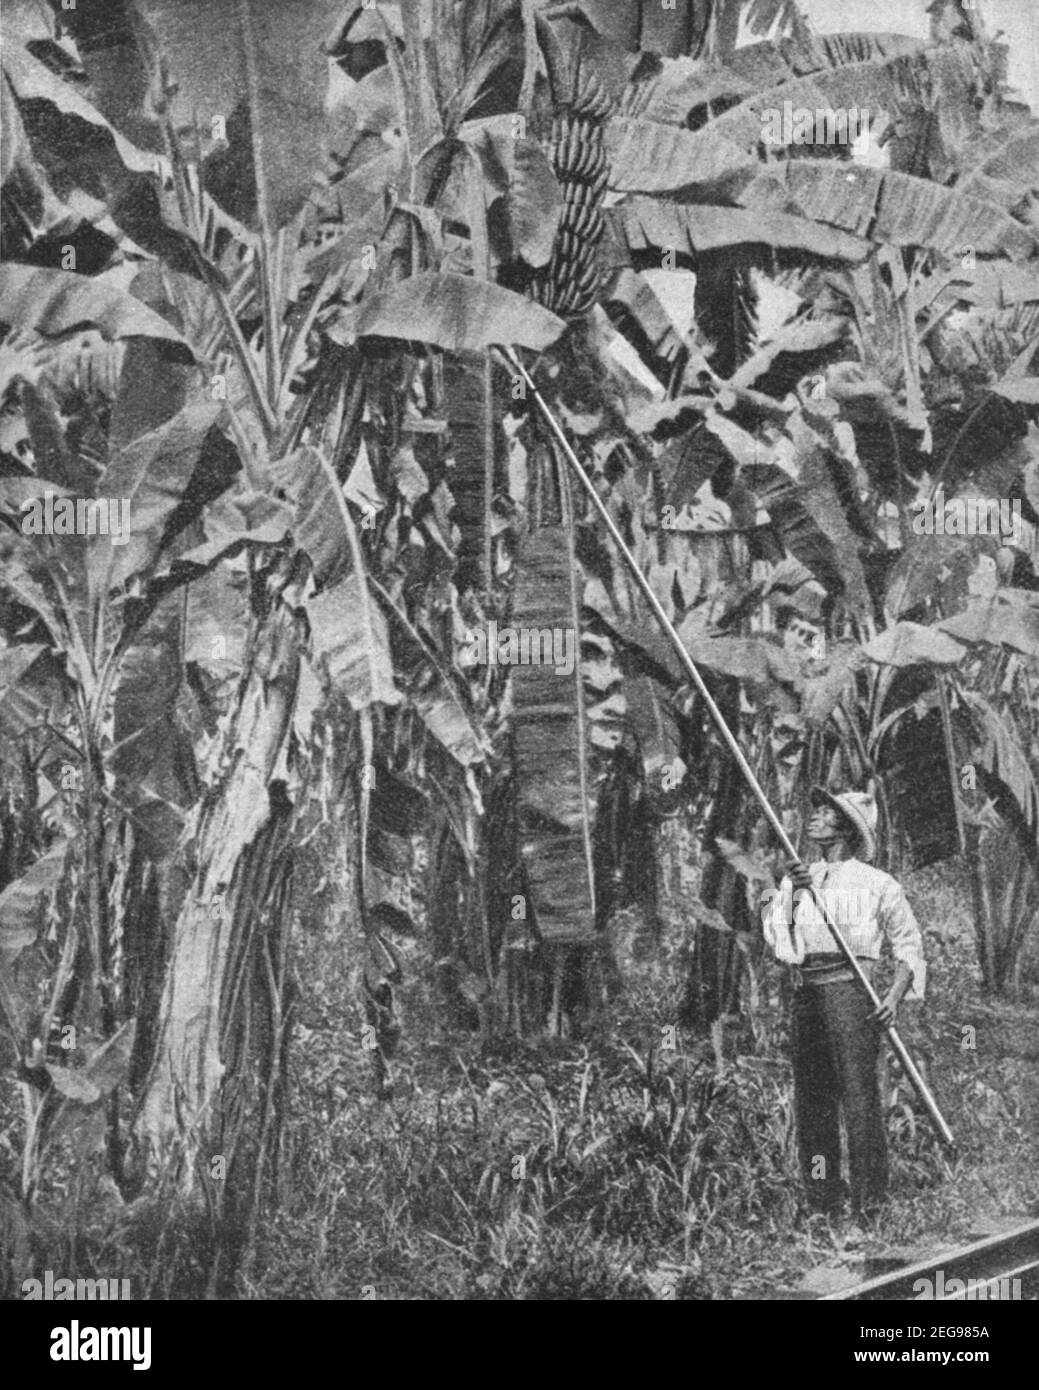 Early 20th century photo of Jamaican man harvesting bananas on a plantation in Jamaica circa early 1900s during the period when the island was a British colony Stock Photo